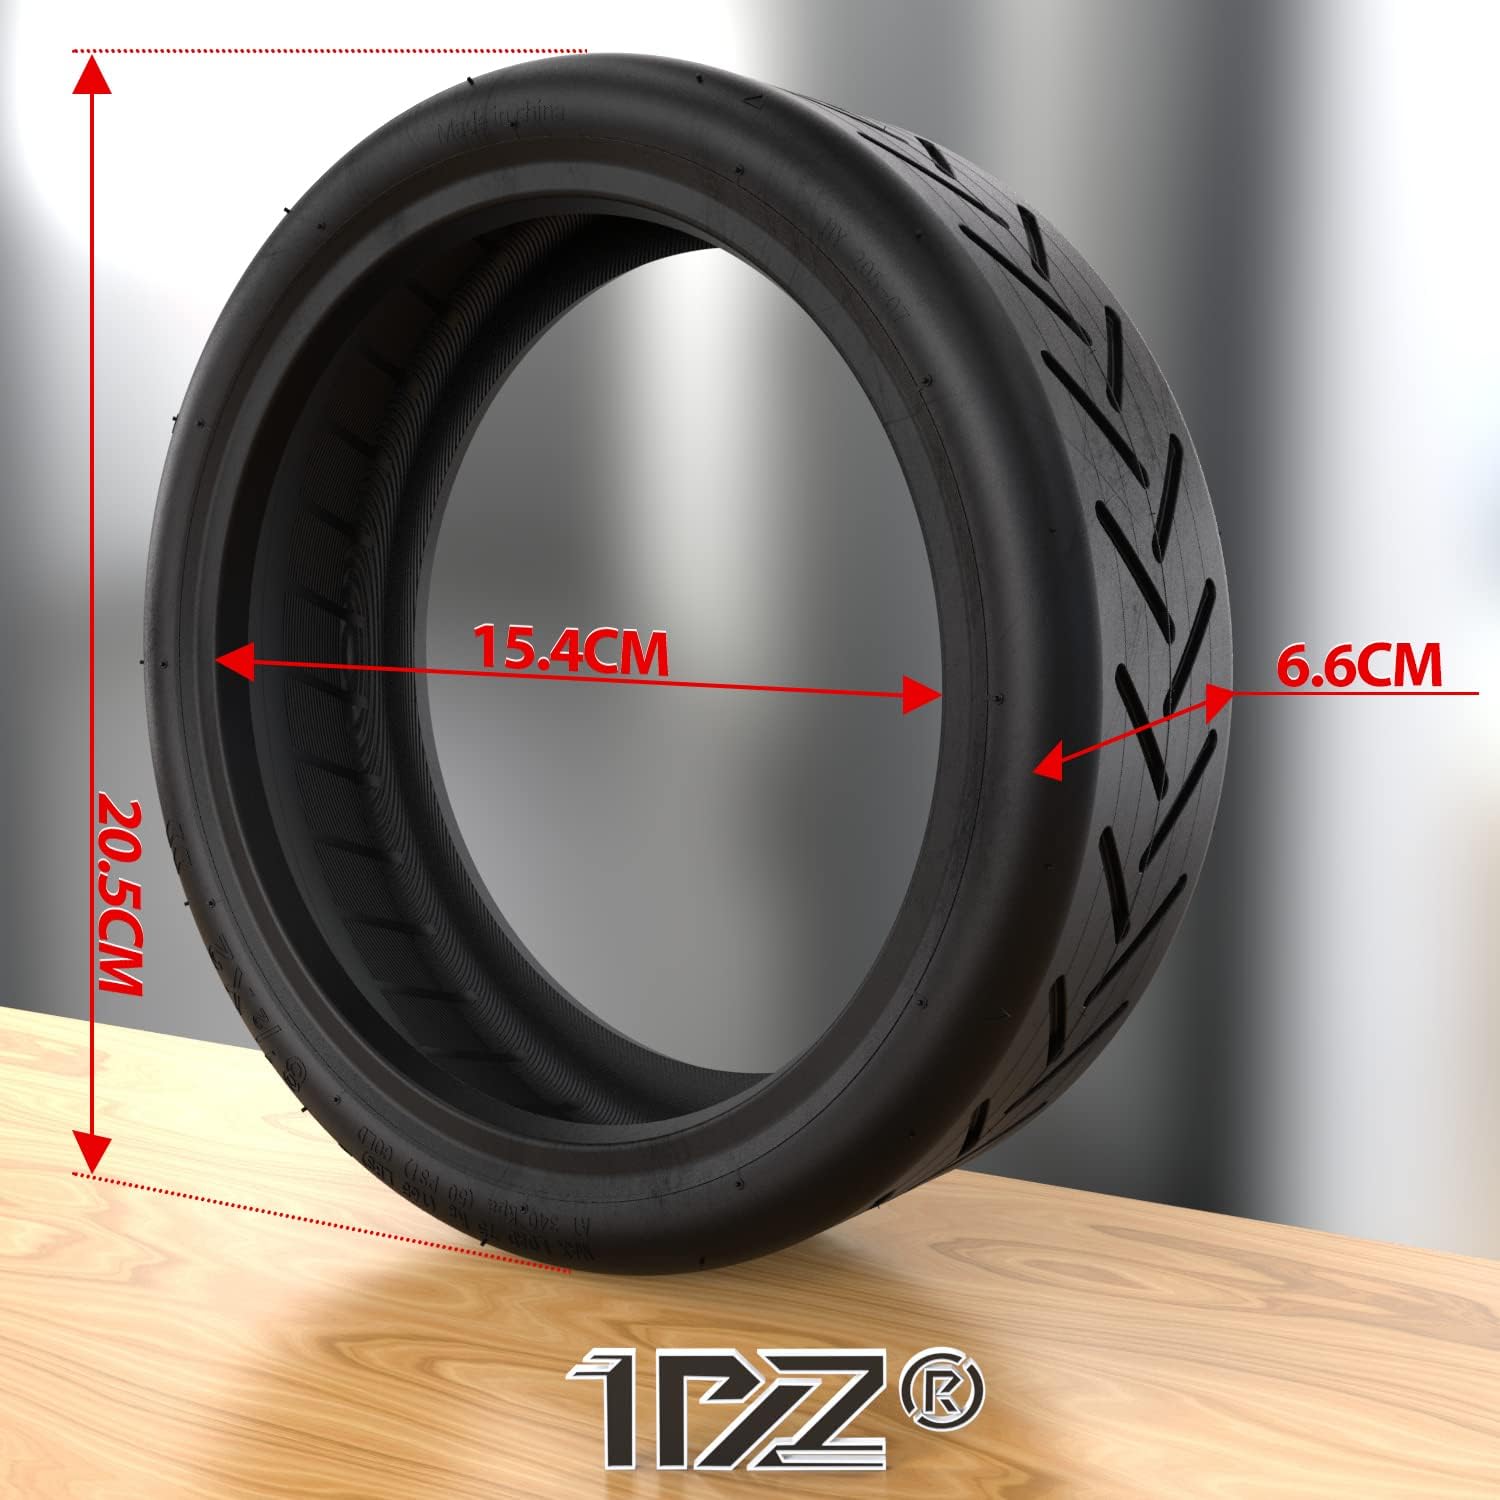 1PZ 8.5 Inch Inner Tube 8 1/2" x 2" Pneumatic Tire Replacement for Mijia Xiaomi M365 Pro Gotrax Electric Scooter Inflated Spare Tire Pocket mini Bike (2 Set)